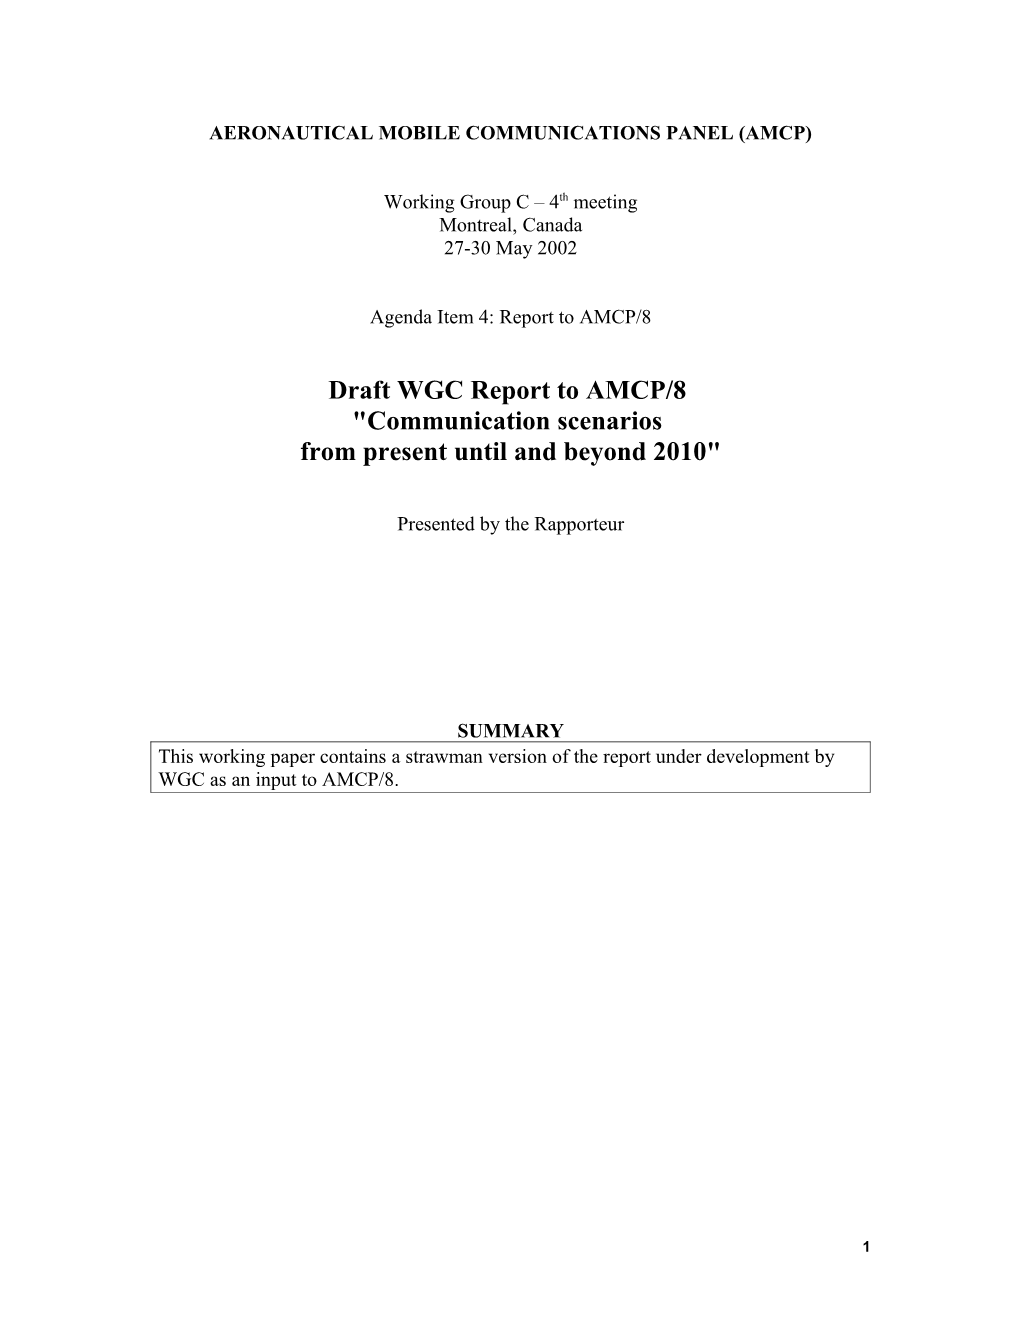 Draft WGC Report to AMCP/8: Communication Scenarios from Present Until and Beyond 2010